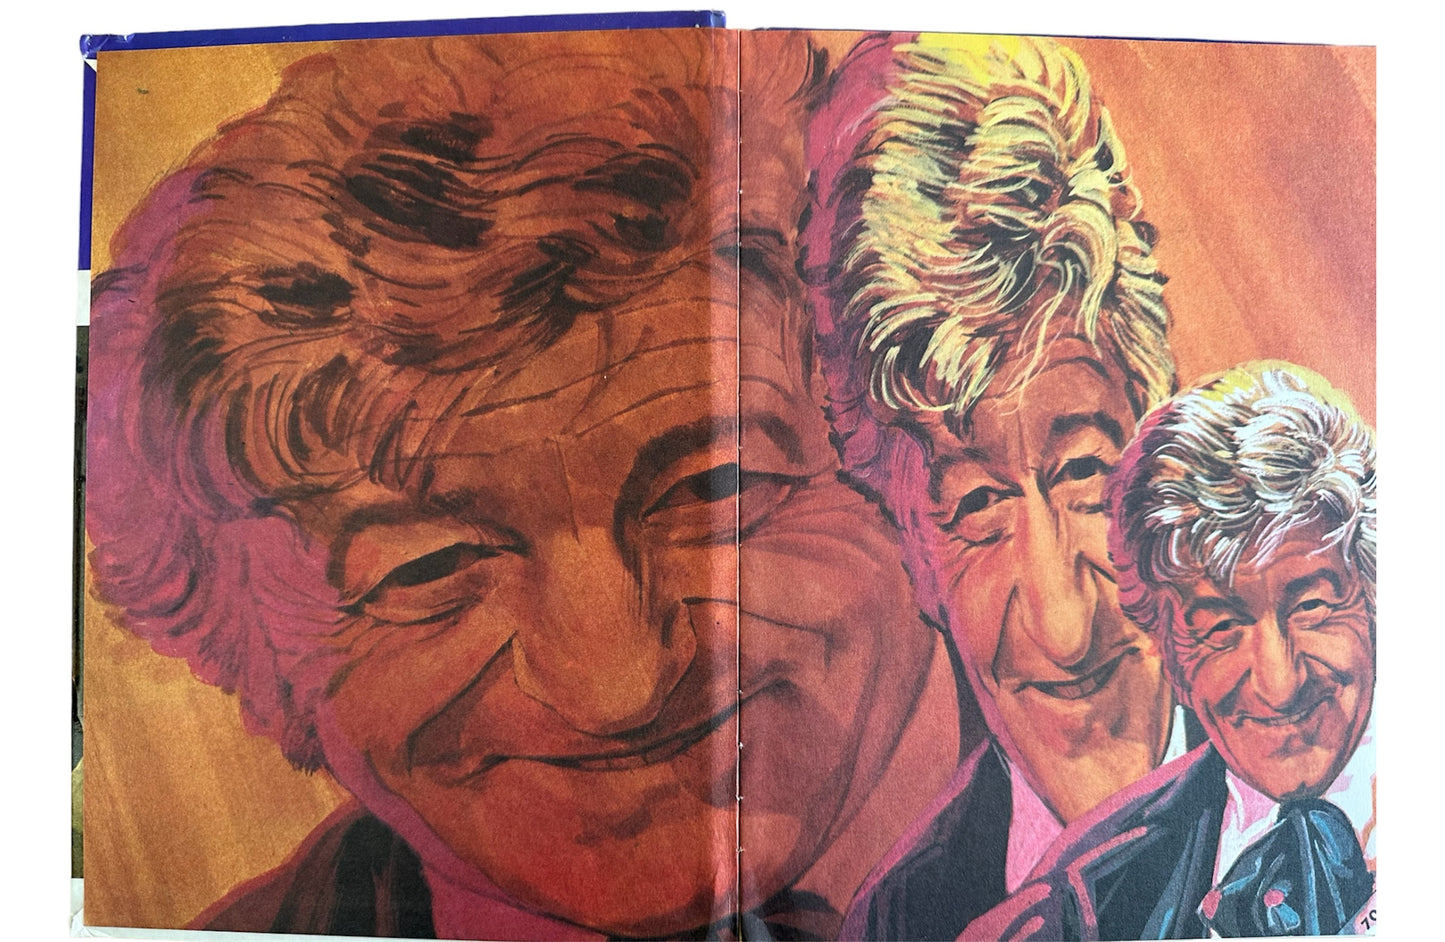 Vintage The Dr Who Annual 1973 Starring Jon Pertwee - Shop Stock Room Find